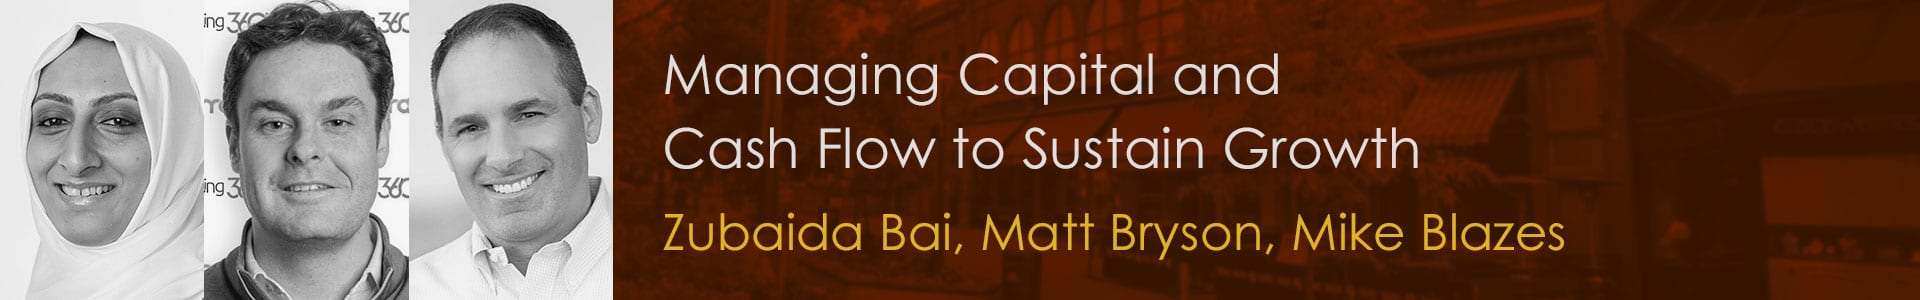 Join Zubaida Bai, Matt Bryson and Mike Blazes for "Managing Capital and Cash Flow to Sustain Growth."